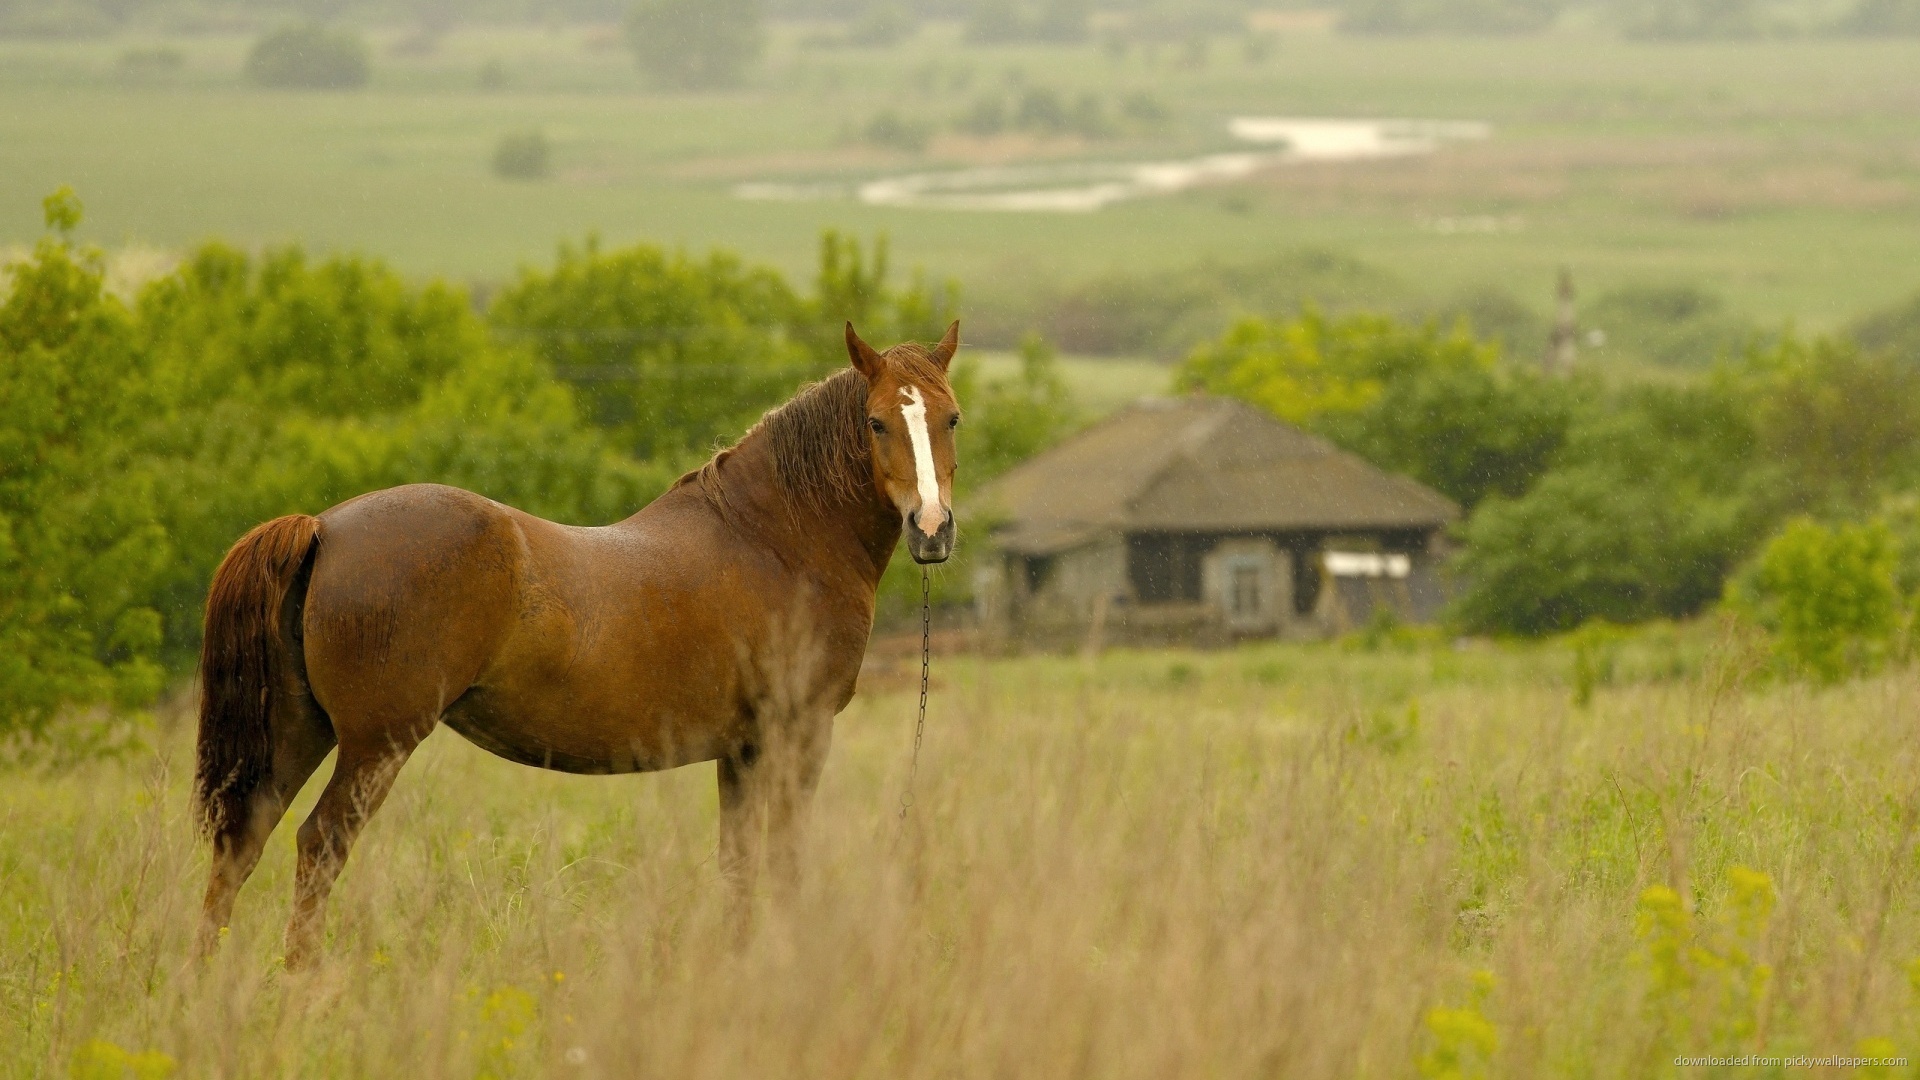 Brown Horse In A Field Wallpaper Picture For iPhone Blackberry iPad